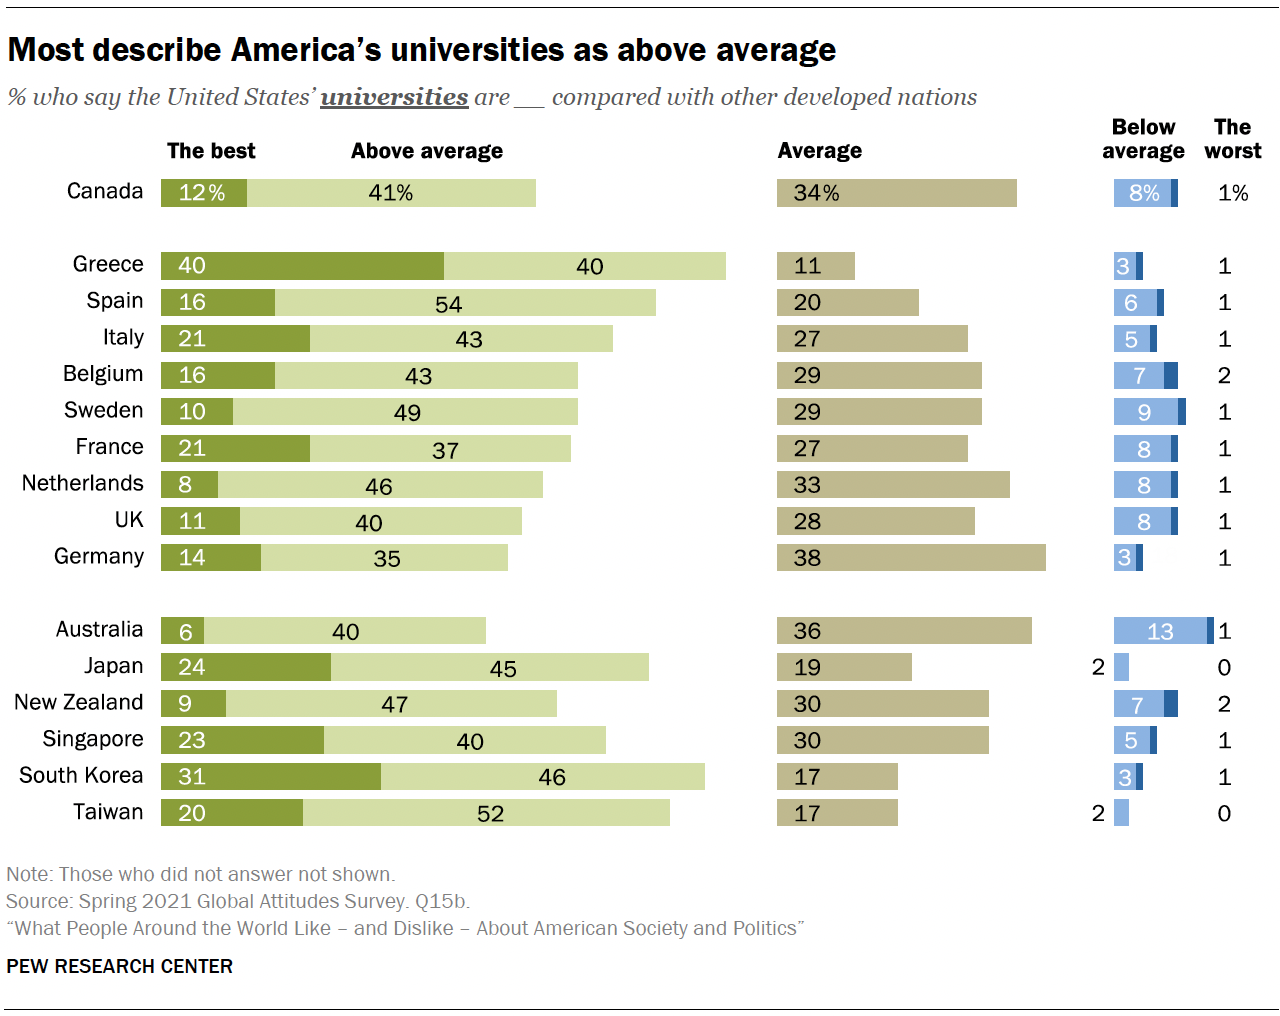 Most describe America’s universities as above average